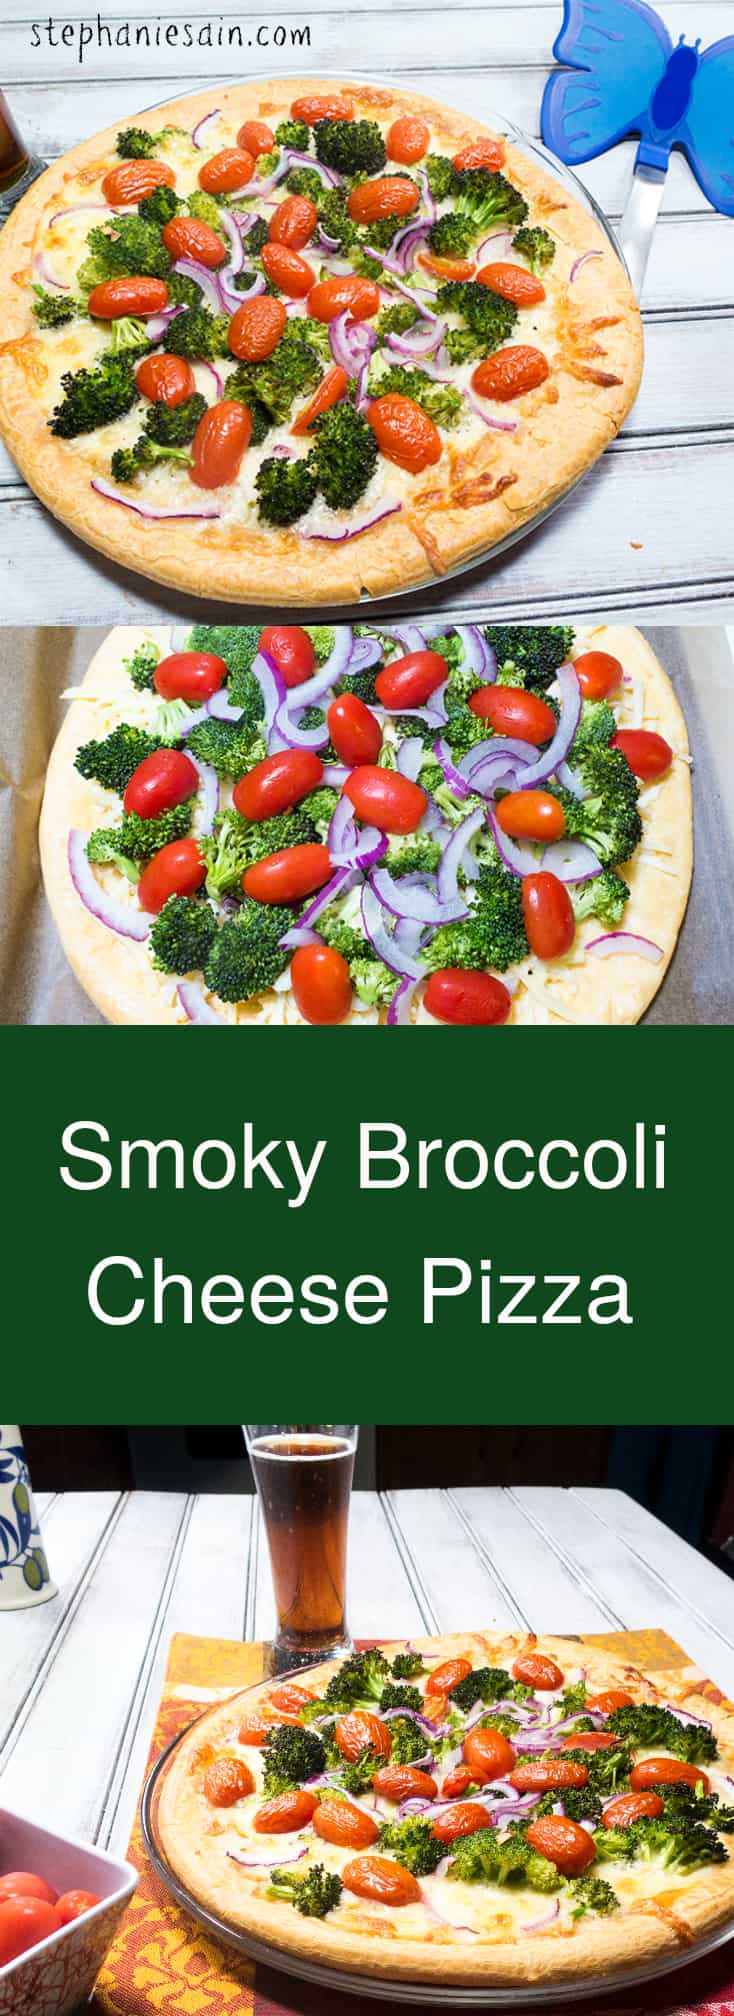 Smoky Broccoli Cheese Pizza is a tasty, easy to prepare pizza with a great smoky flavor. Vegetarian and Gluten Free.